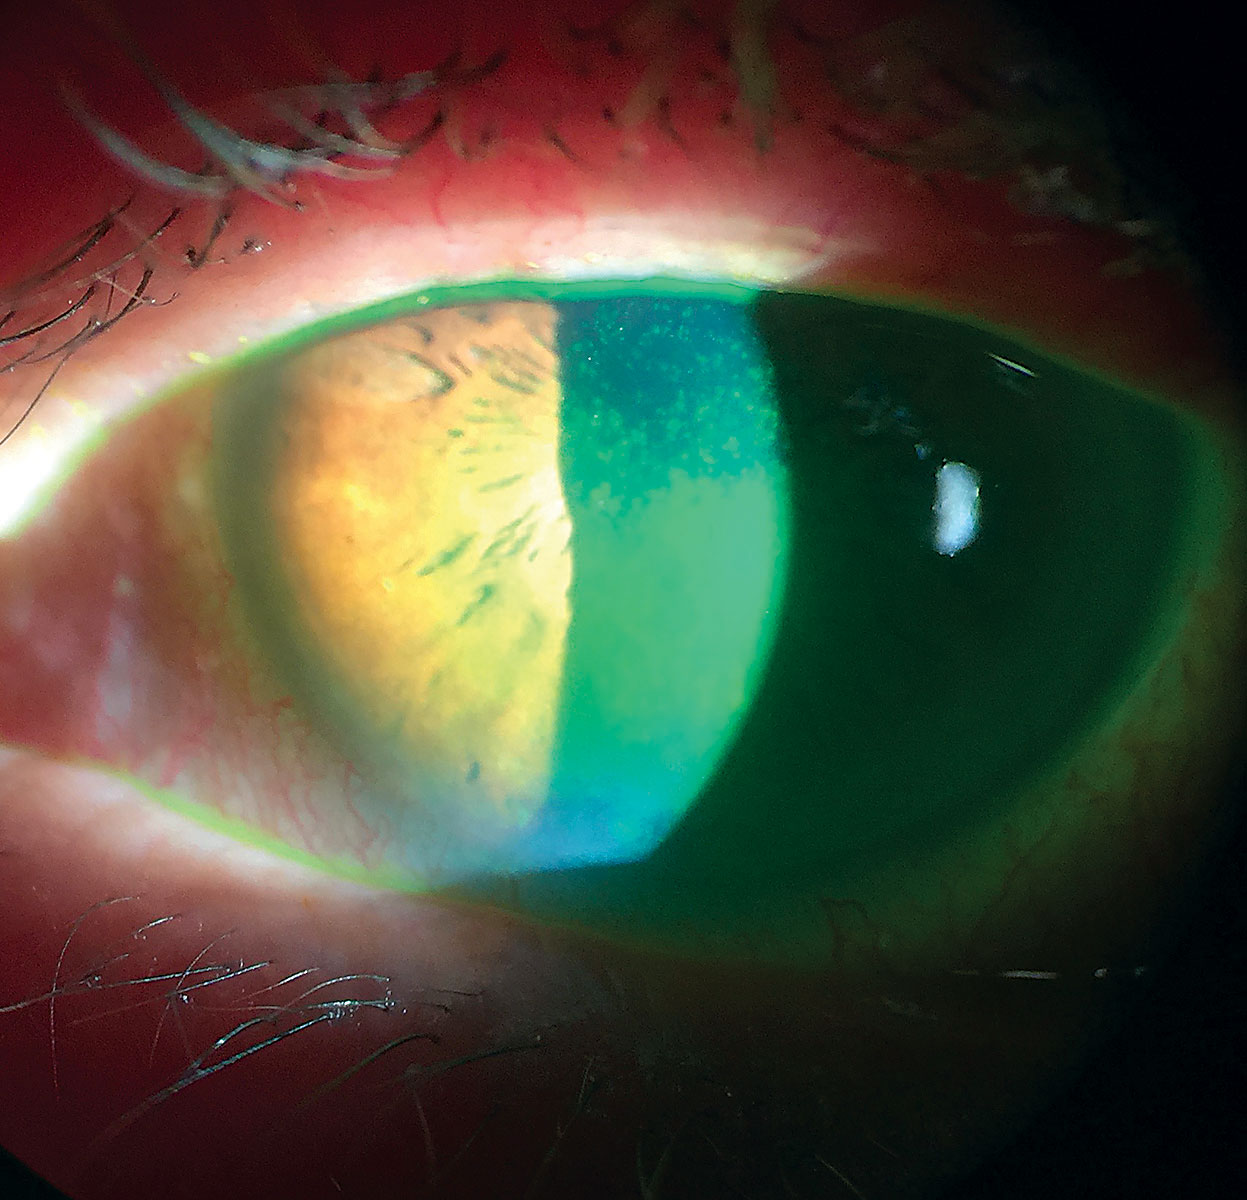 A cytokine coating for soft lenses could provide sustained dry eye treatment.